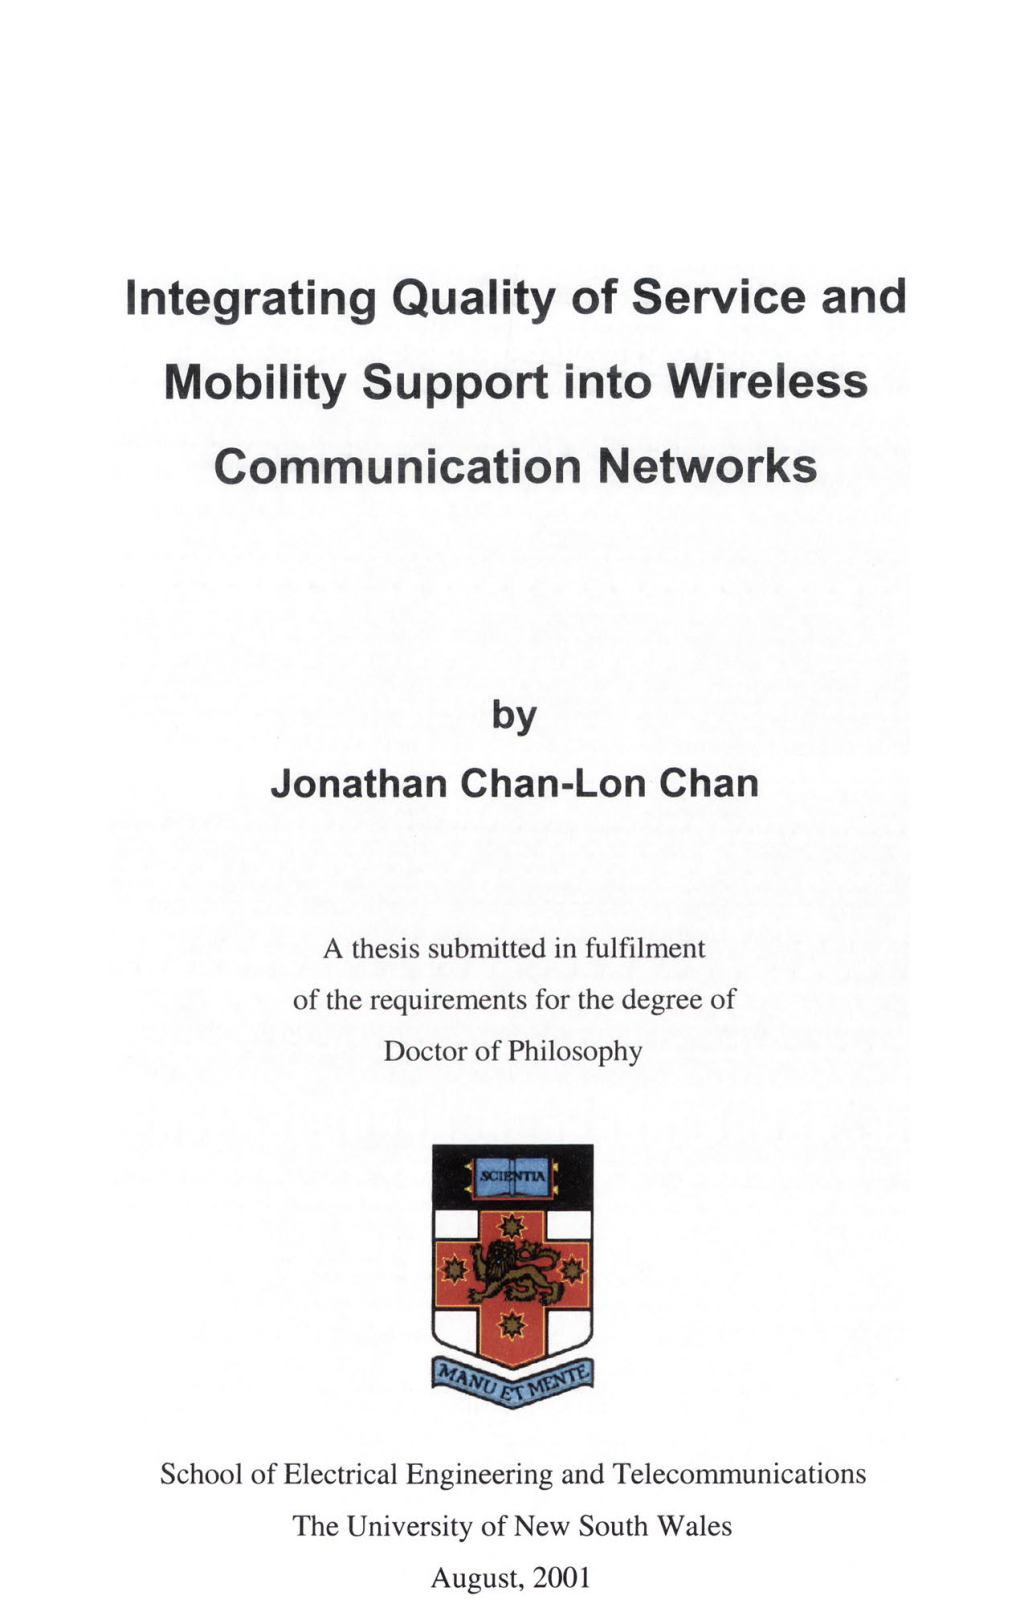 Integrating Quality of Service and Mobility Support Into Wireless Communication Networks